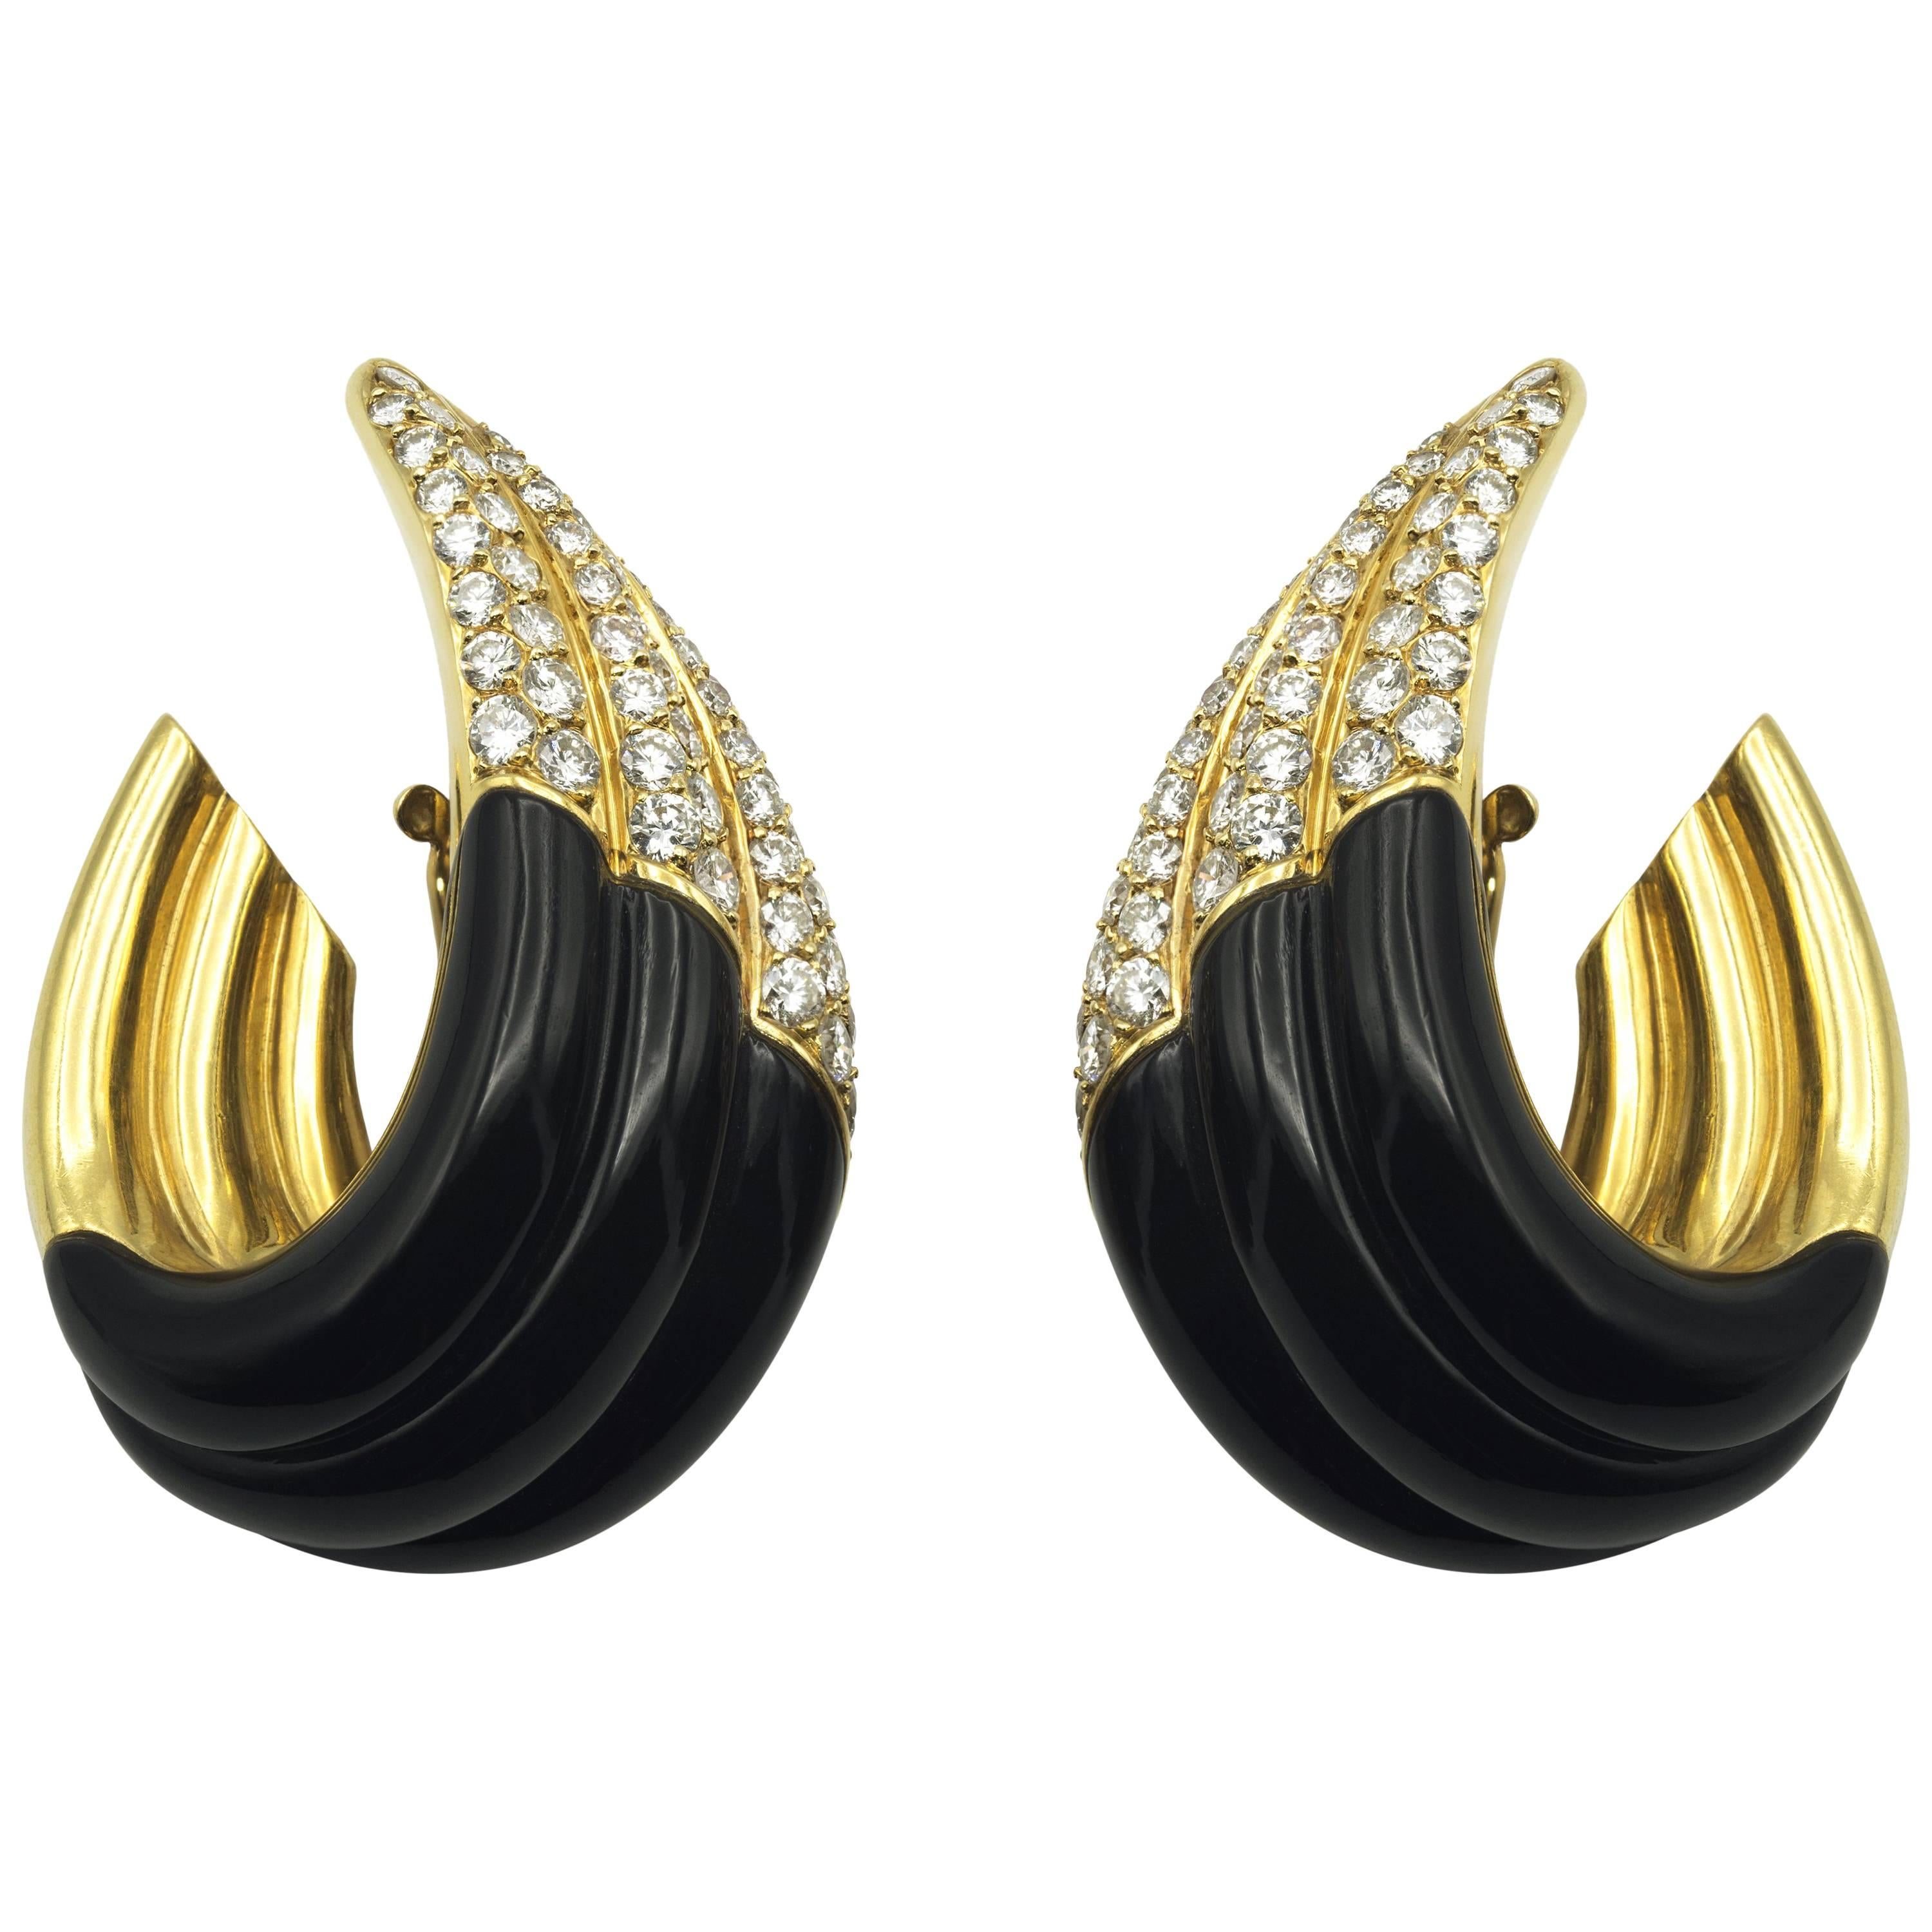 Fred Yellow Gold and Onyx Earrings